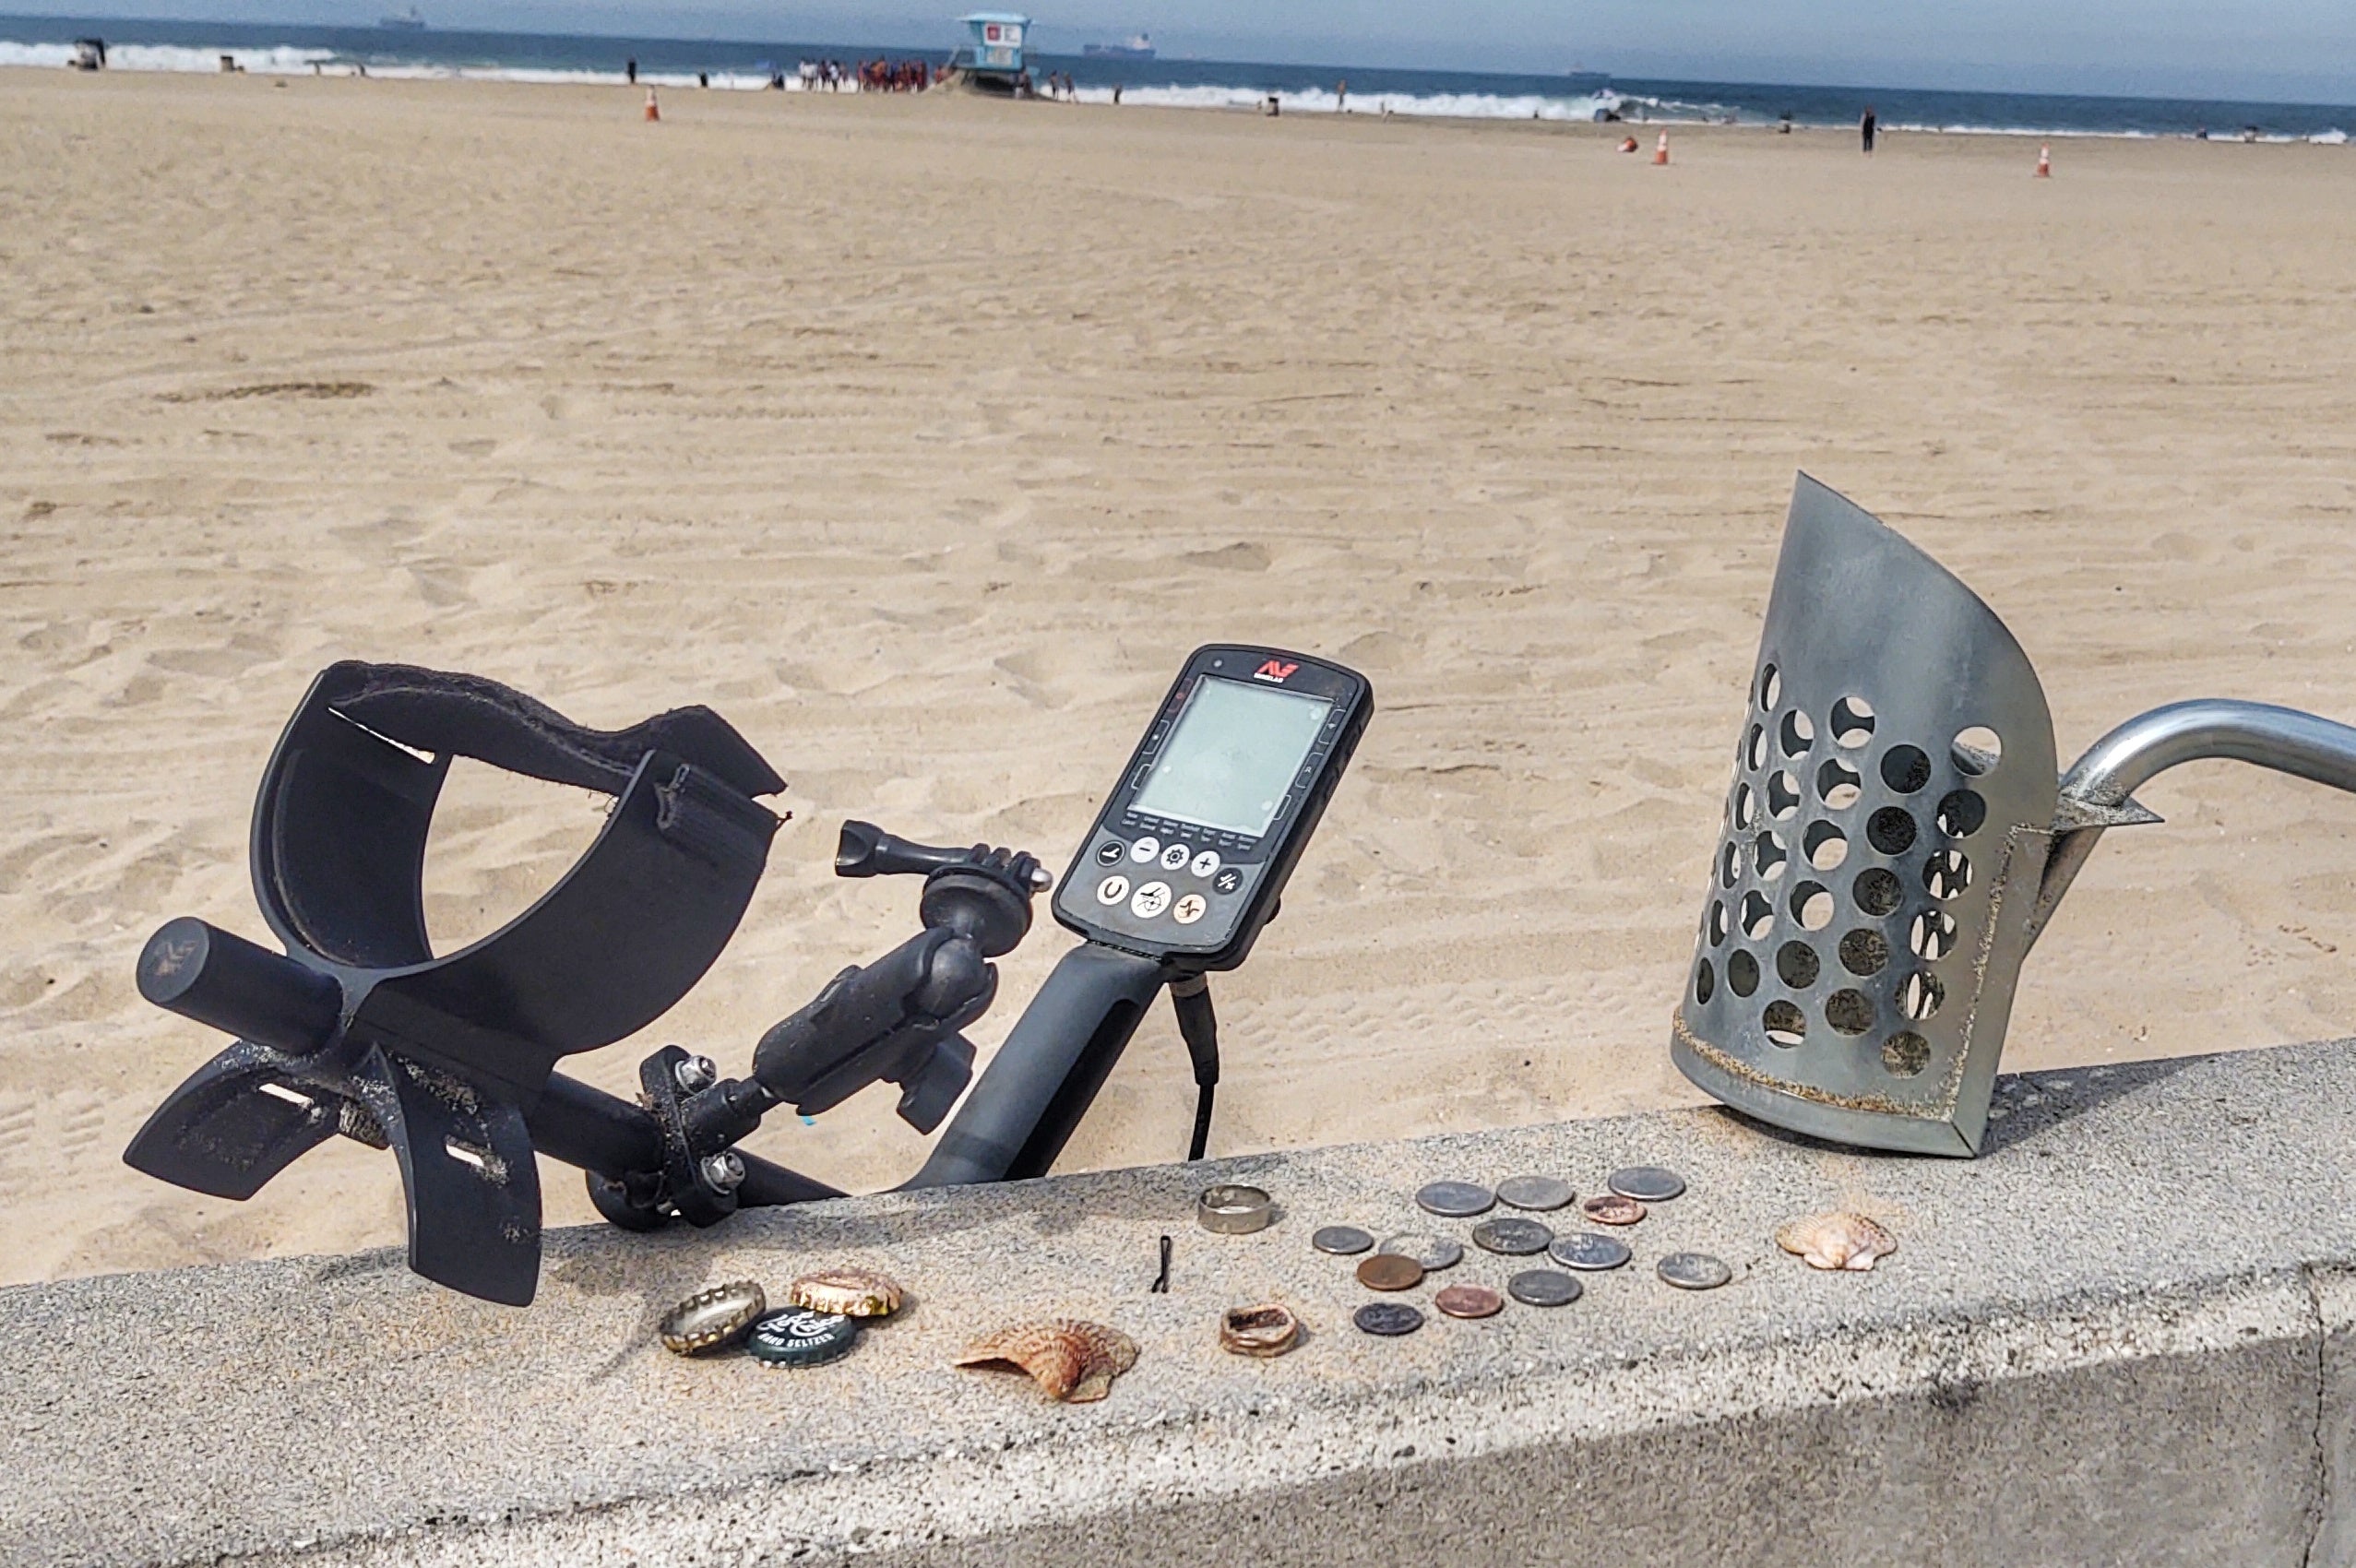 The Equinox 800 Metal Detector Excels at Hunting Saltwater Beaches - Finds Rings and Money!